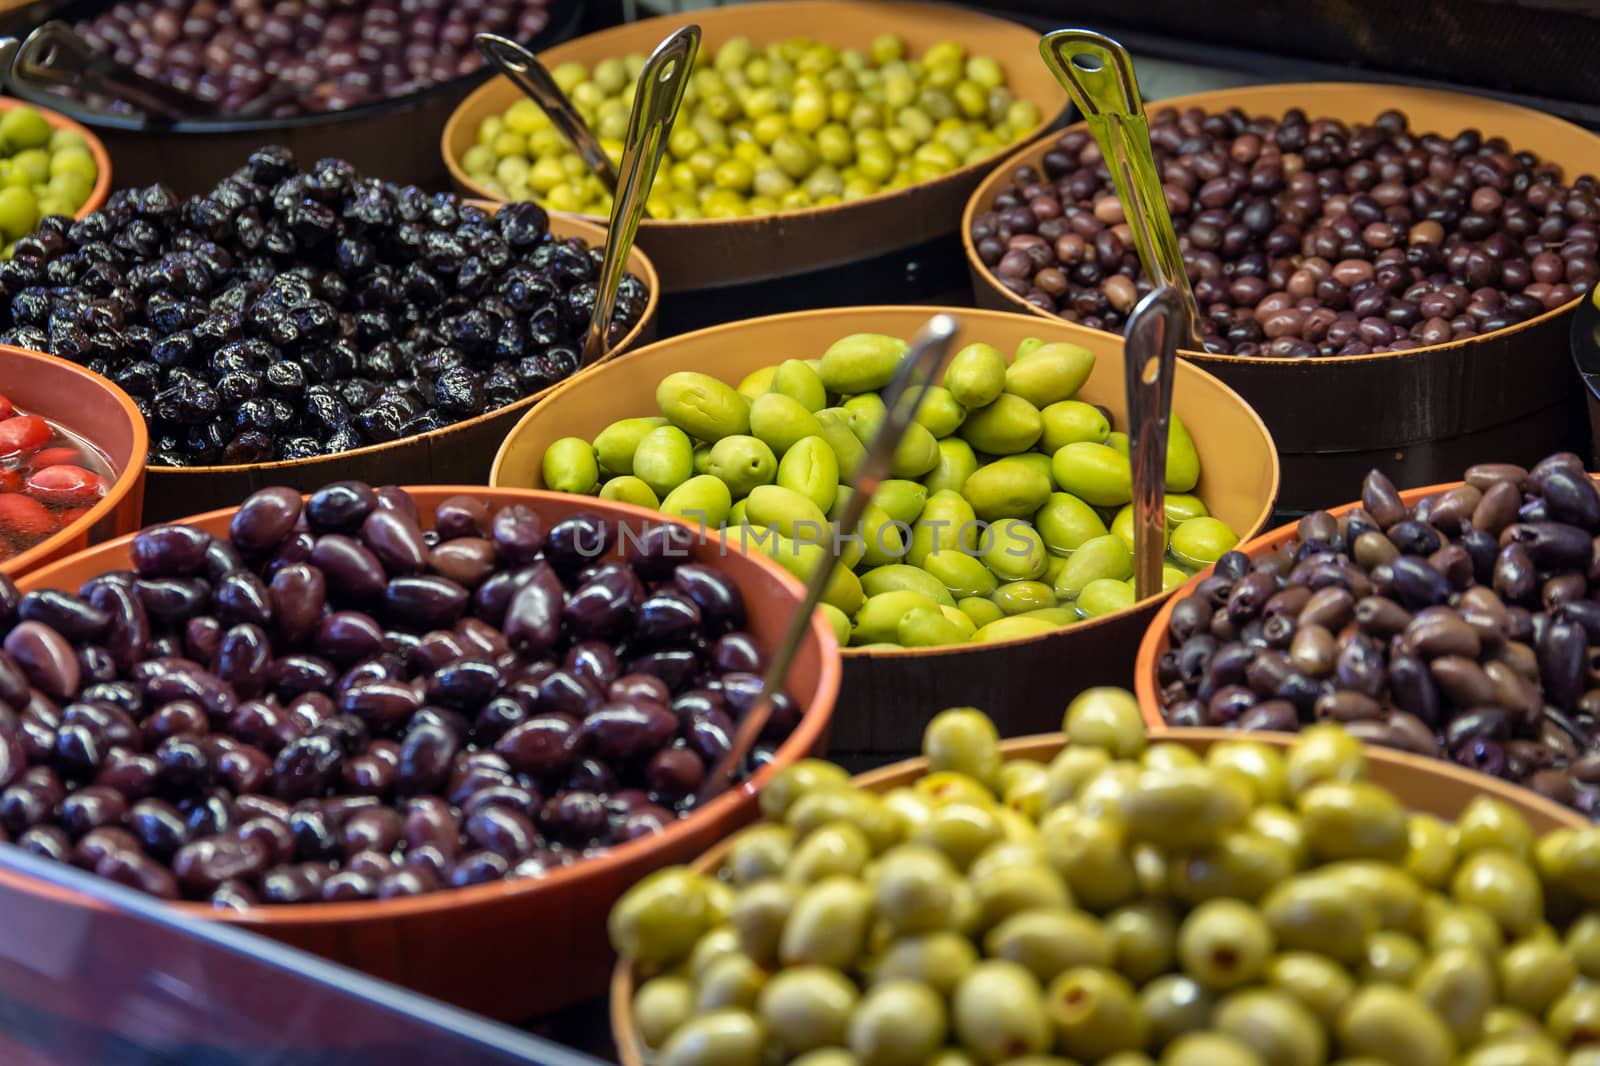 Bowls of green and black olives on display on a market stall by magicbones